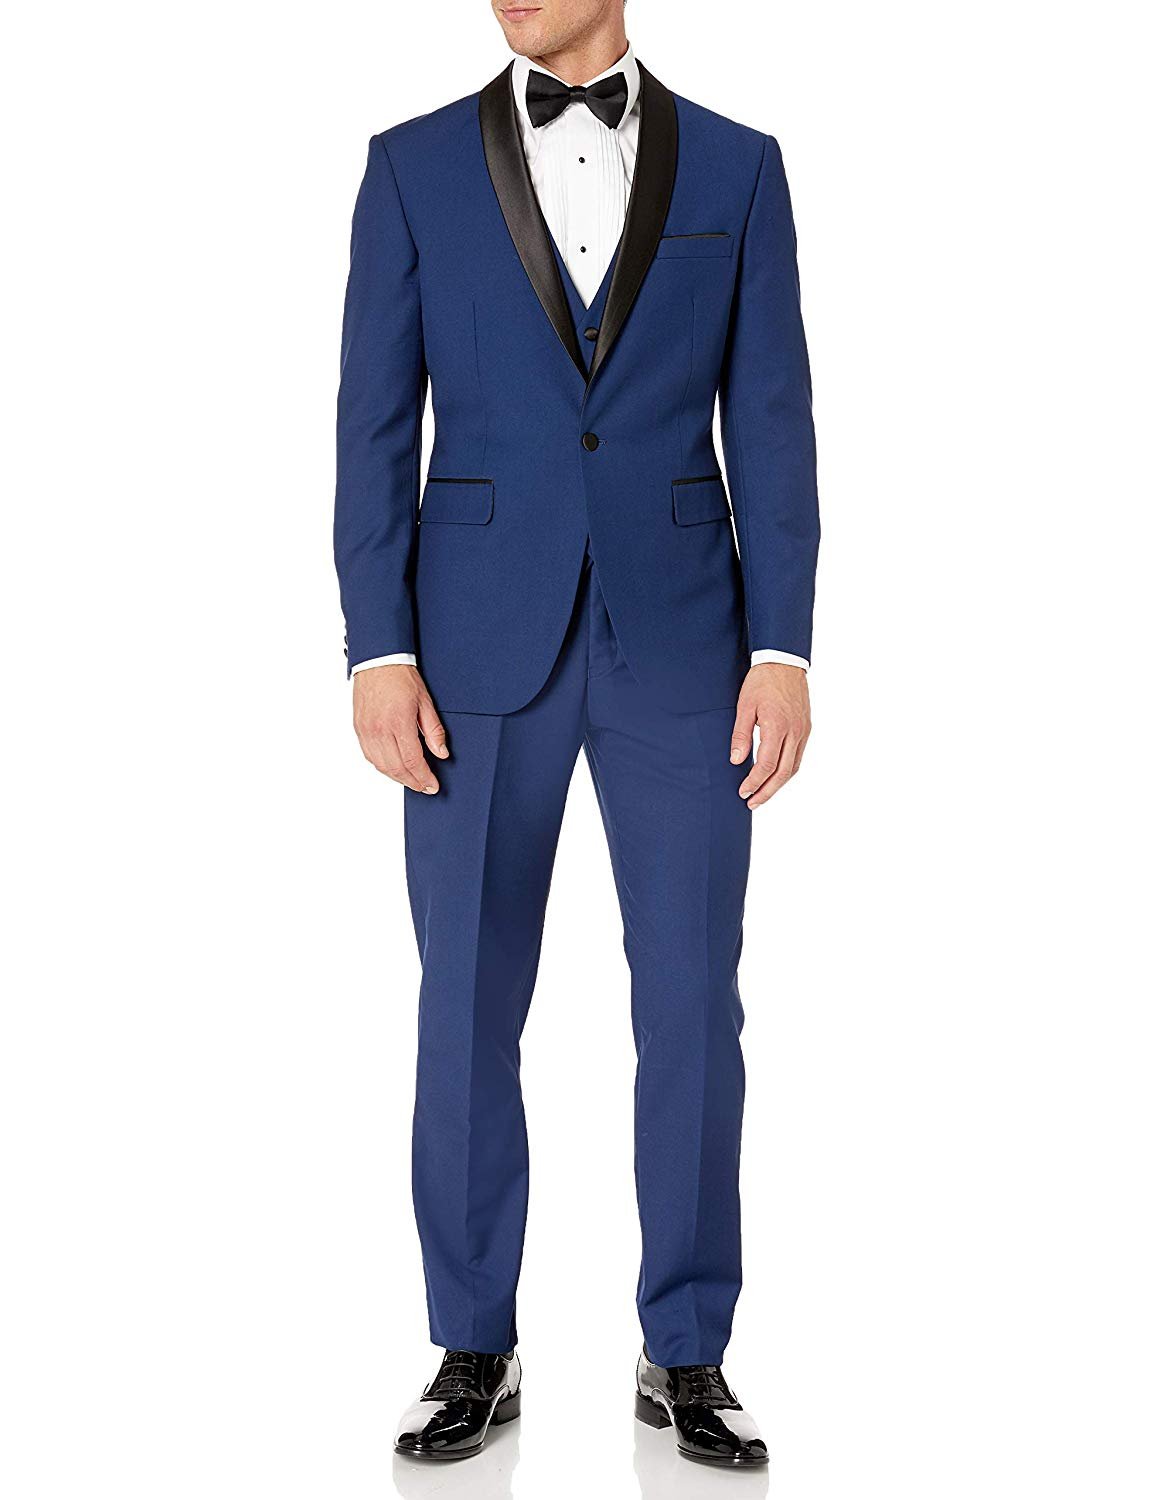 Adam Baker by Statement Men's Single Breasted Three Piece Shawl Collar Tuxedo - Sapphire Contrast - 56R - image 2 of 6